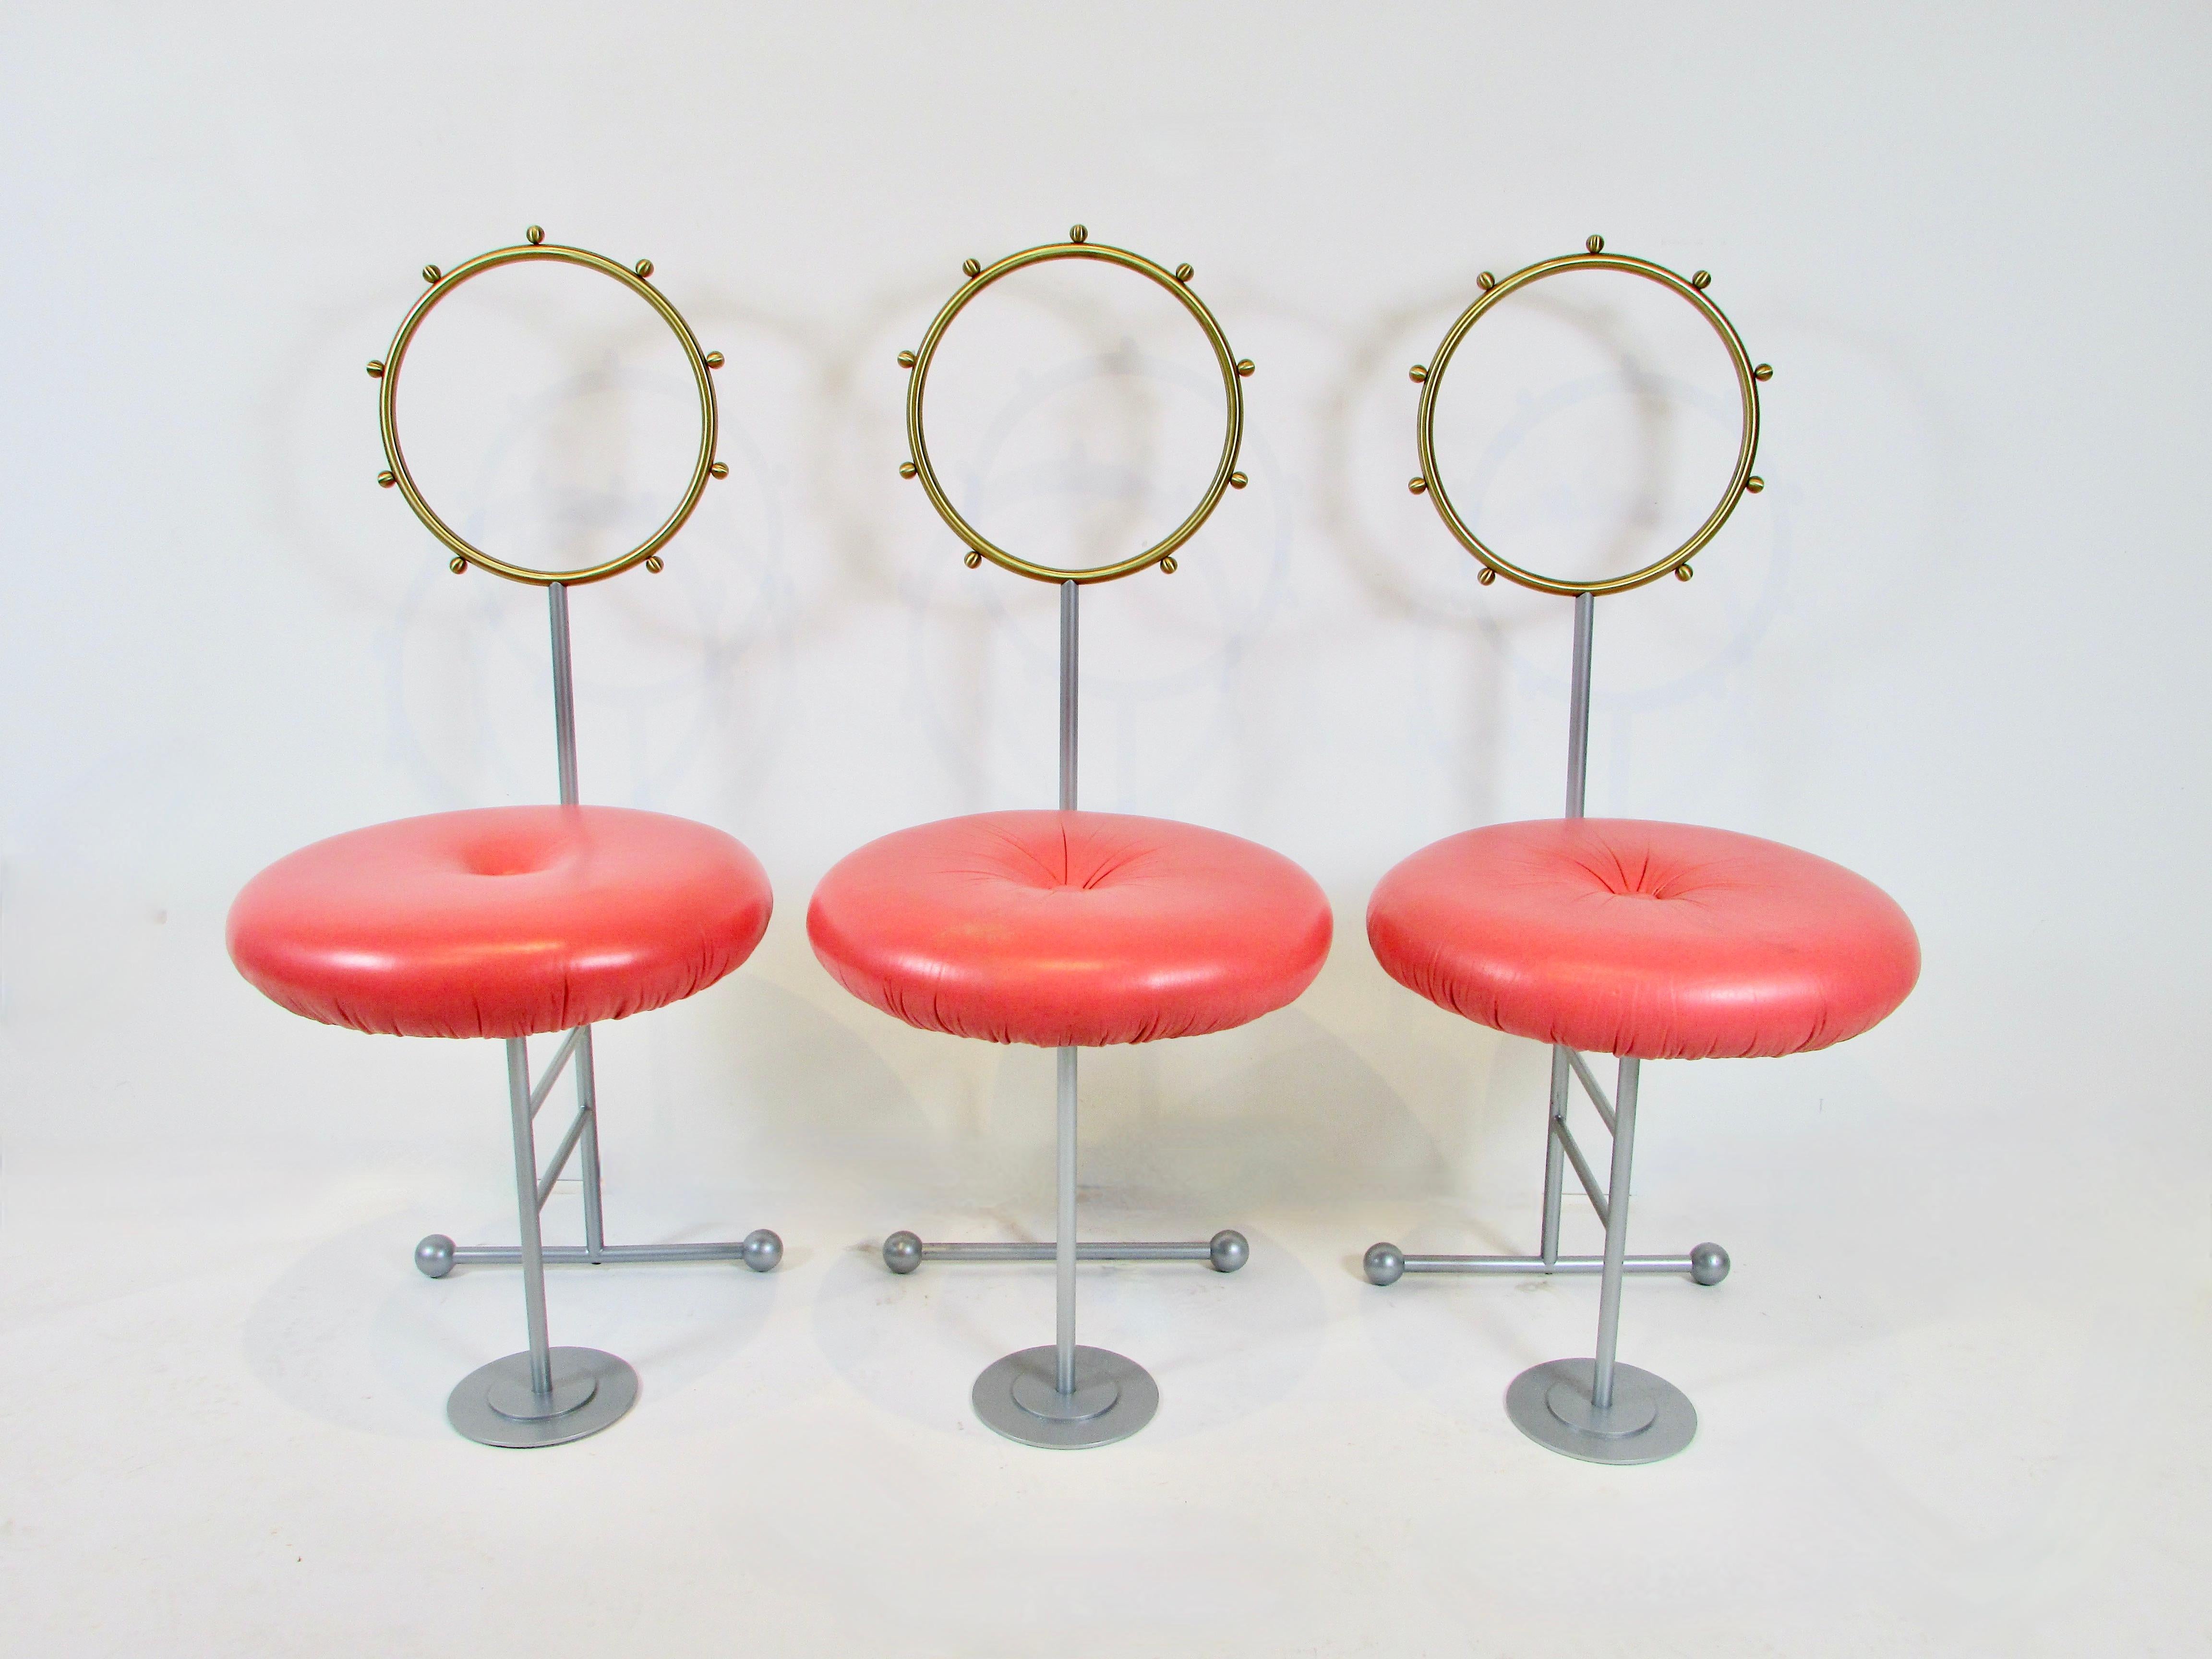  Three fun whimsical post modern occasional chairs designed by Luigi Serafini for Sawaya and Moroni Milan Italy .  Post modern Memphis style chairs always brings a smile to my face . Circular backrest has a 11.5